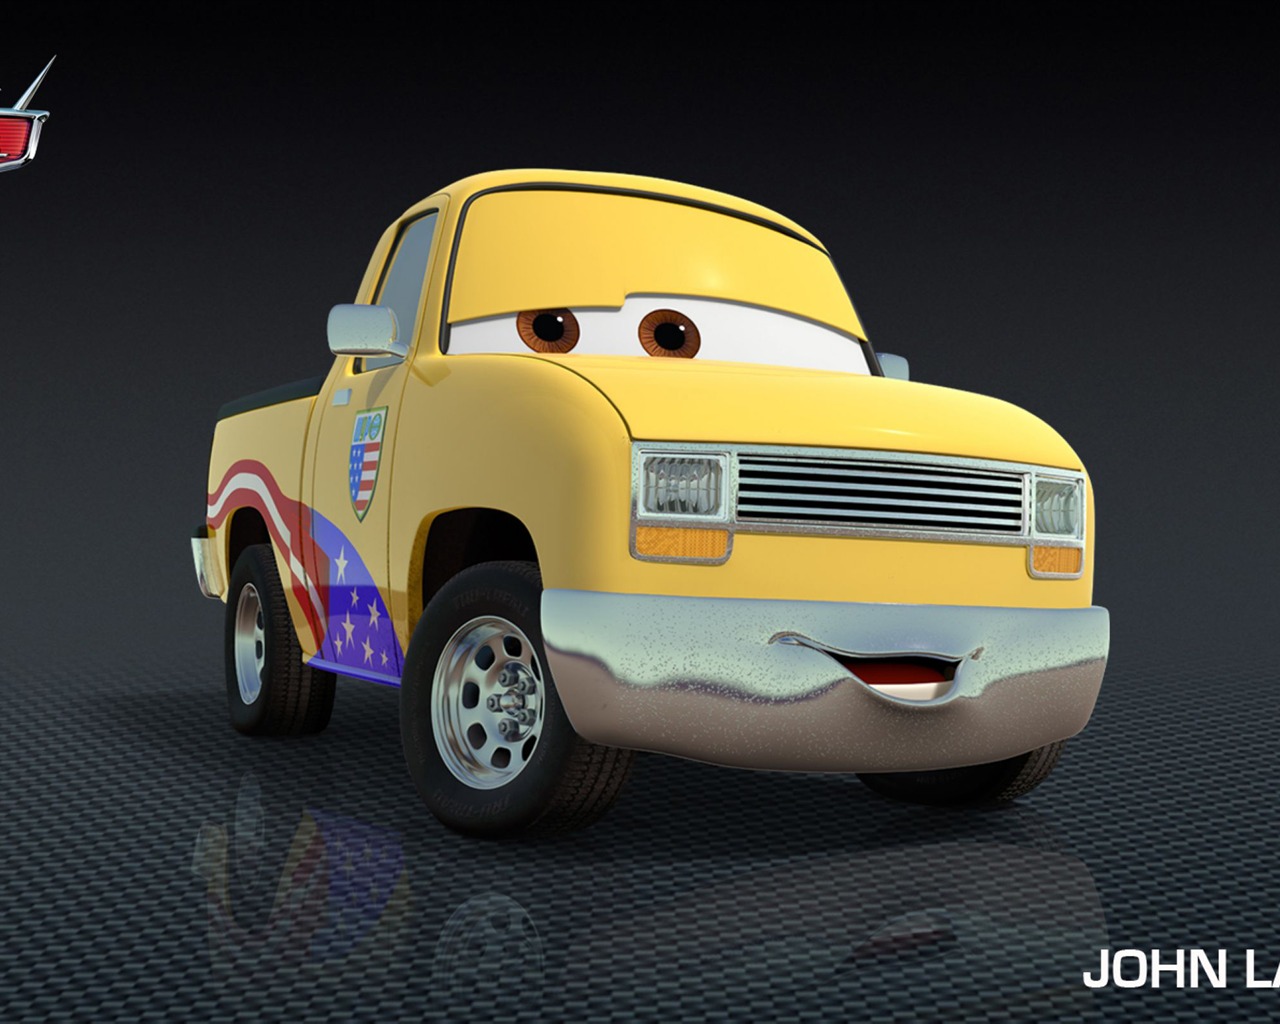 Cars 2 wallpapers #30 - 1280x1024